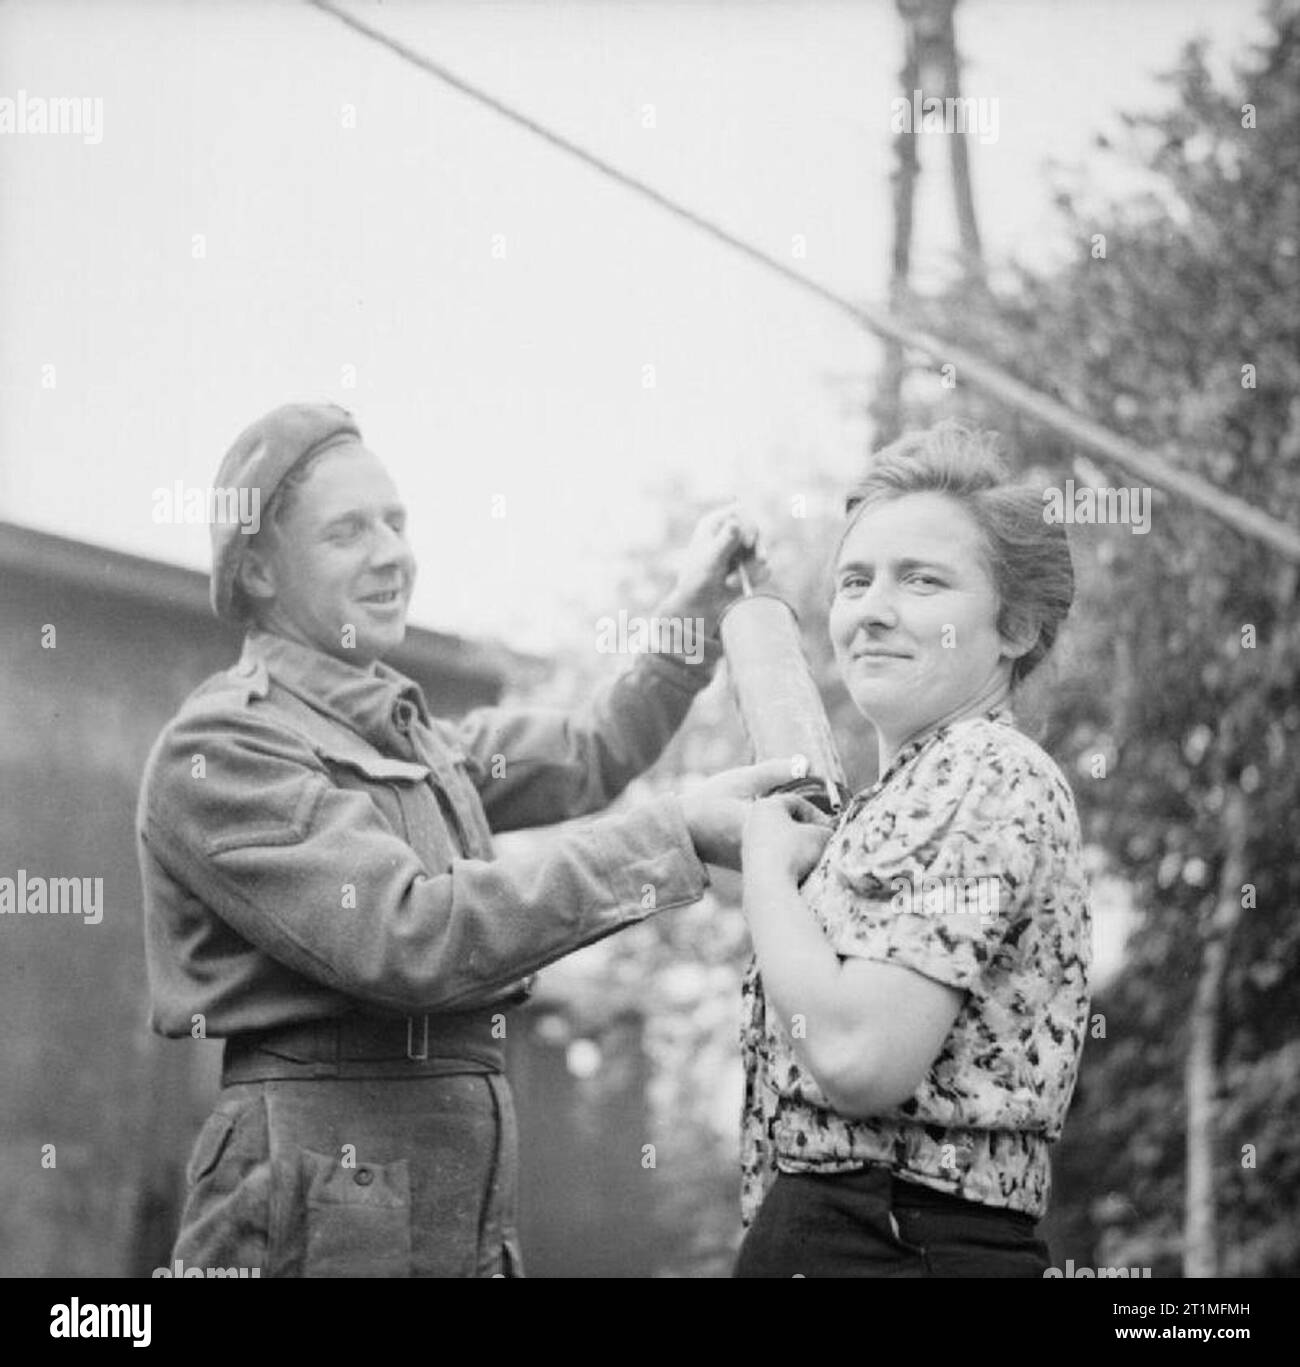 The Liberation of Sandbostel Concentration Camp, May 1945 Hygiene in the Field: A Royal Army Medical Corps orderly dusting a former female inmate of the Sandbostel Concentration Camp with DDT powder. Prevention of diseases, such as typhus, among the huge numbers of displaced persons in the North West Europe became an important priority for the RAMC. Stock Photo